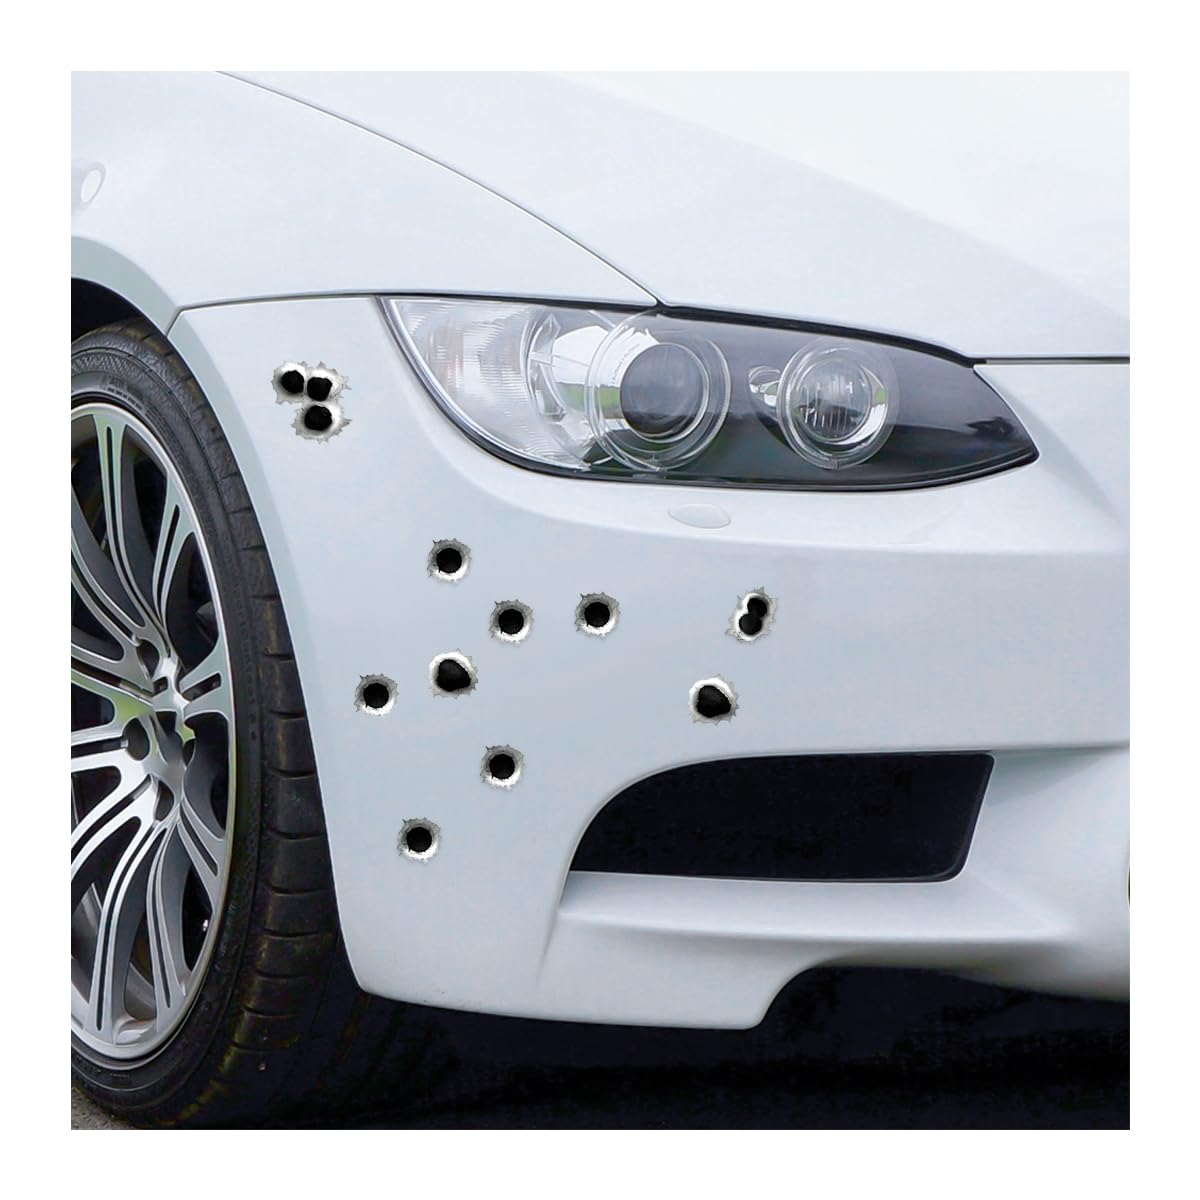 JNNJ 3D Bullet Hole Car Decals Simulation, Stereoscopic Fake Realistic Guns Bullet Hole Stickers, Automotive Cool Removable Waterproof Sticker Decoration for Window Wing Door Body Side(R458-1) von JNNJ